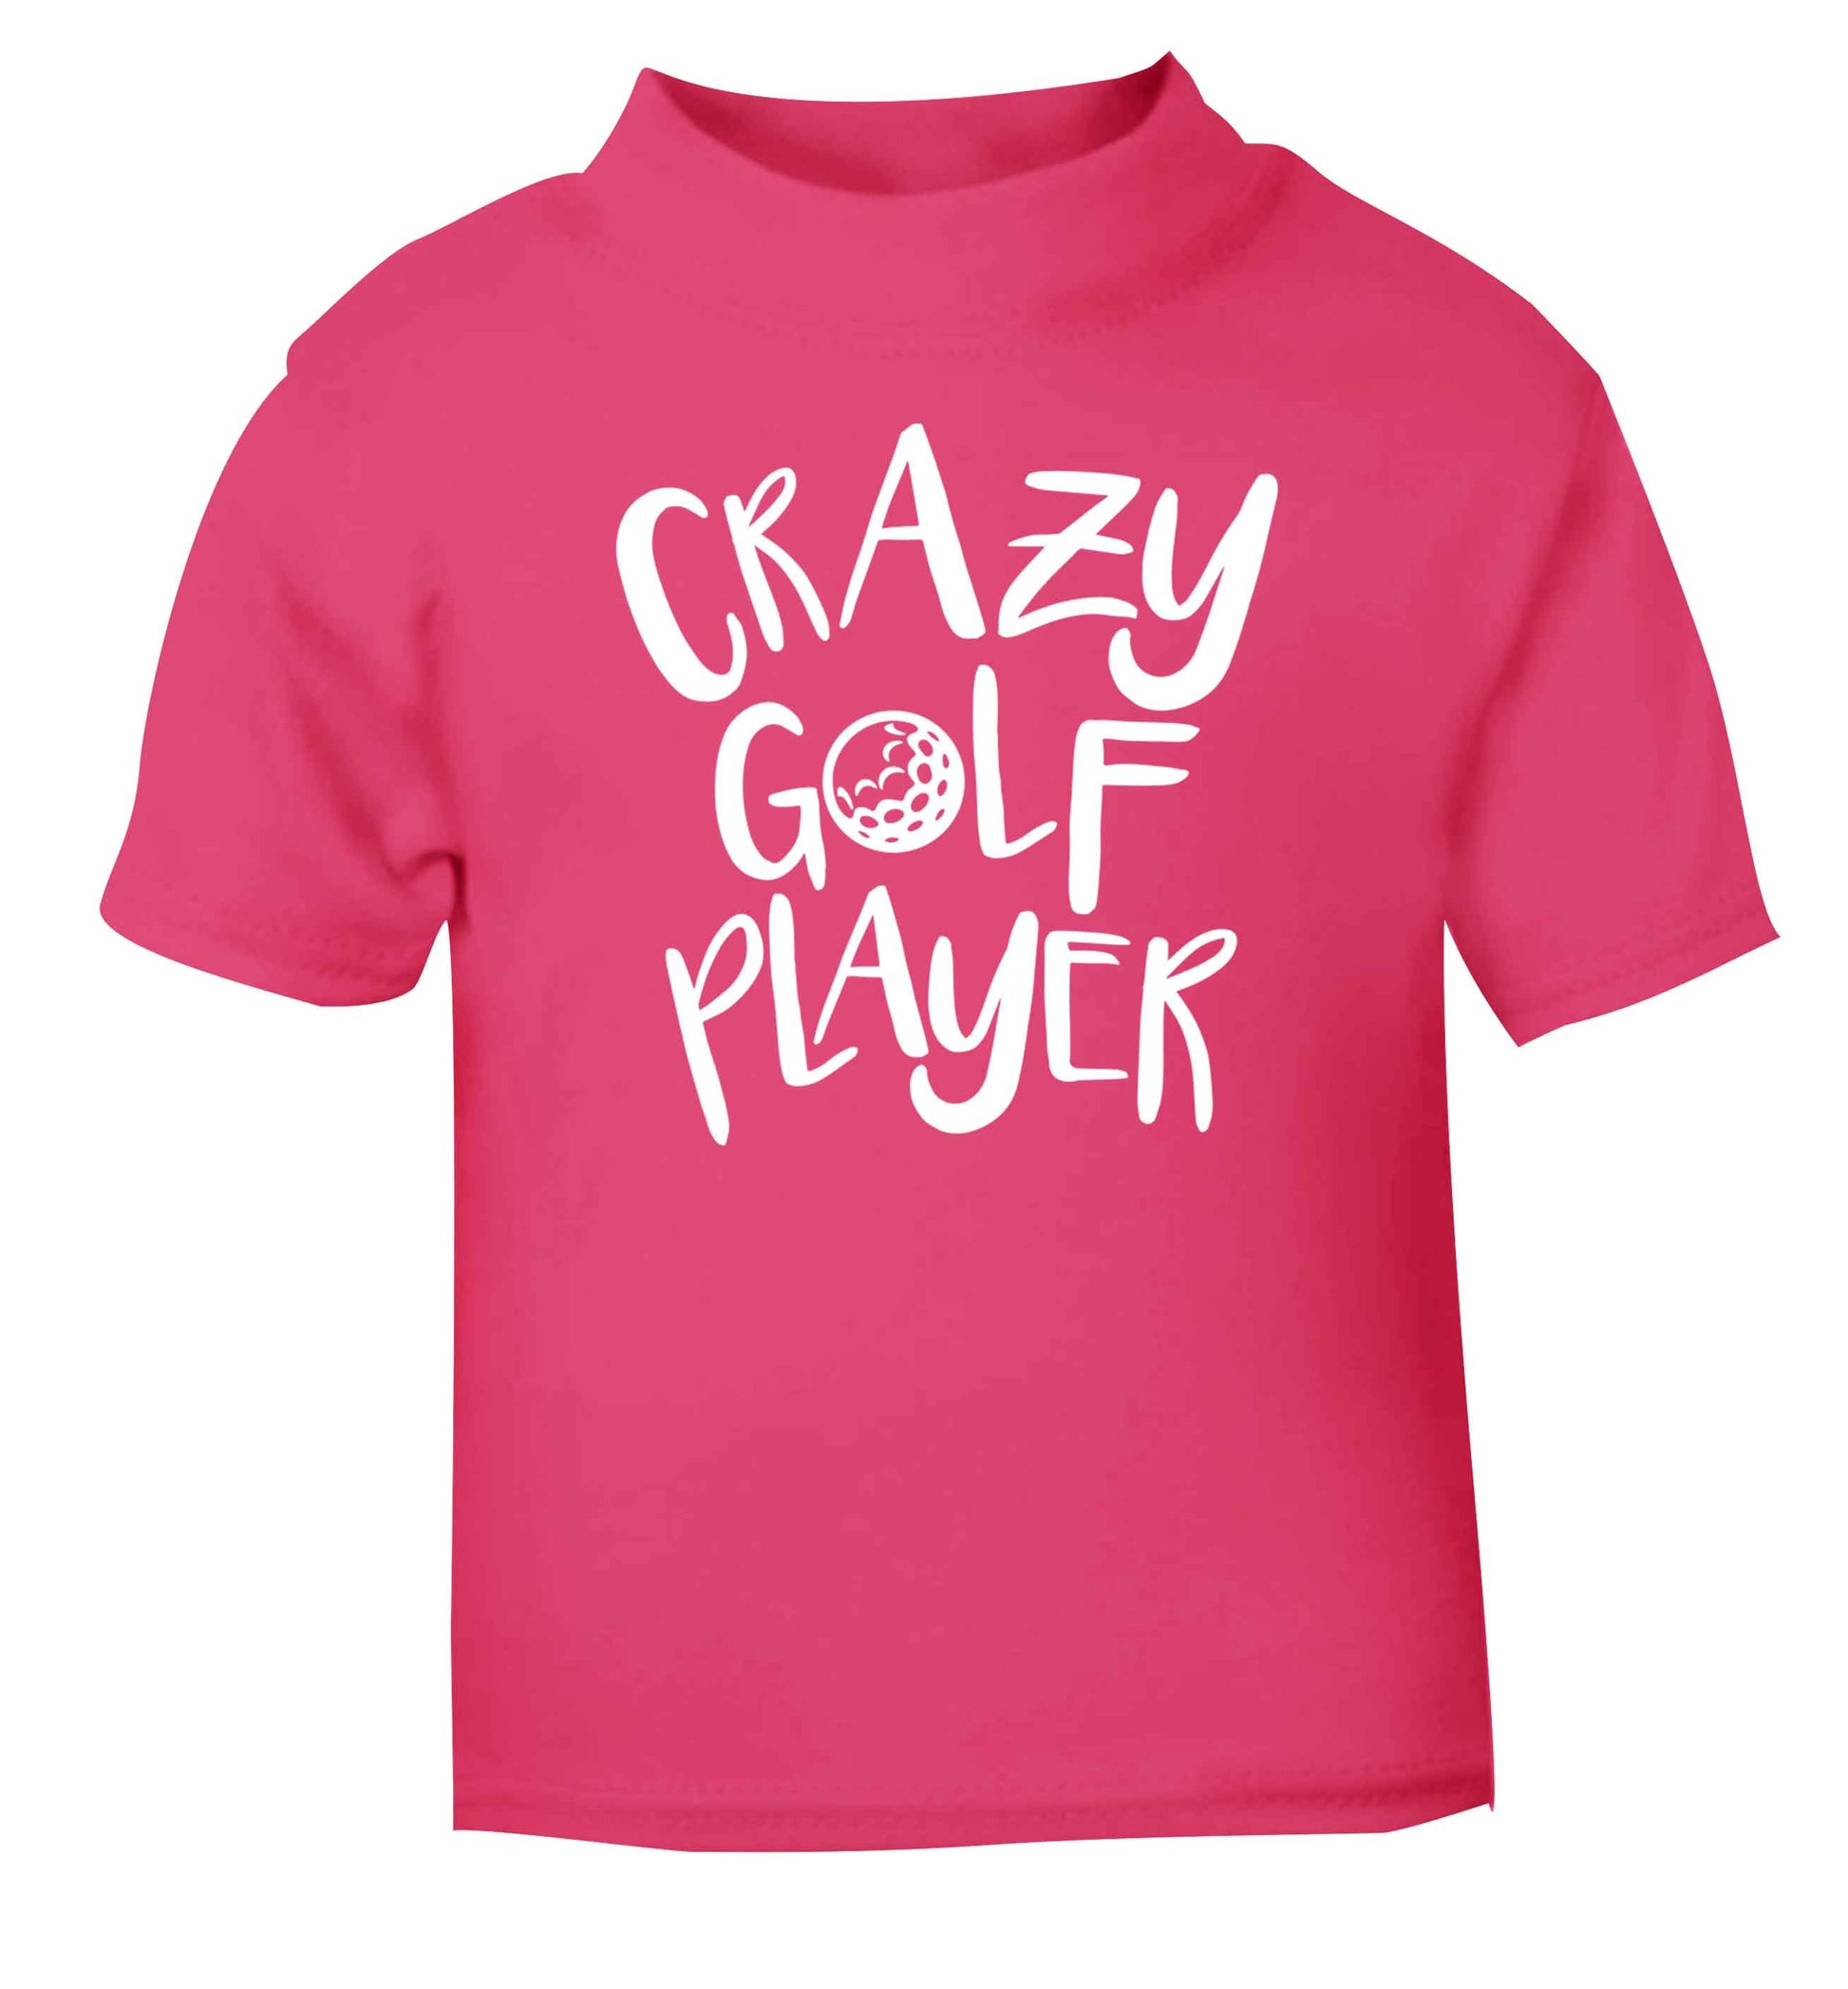 Crazy golf player pink Baby Toddler Tshirt 2 Years